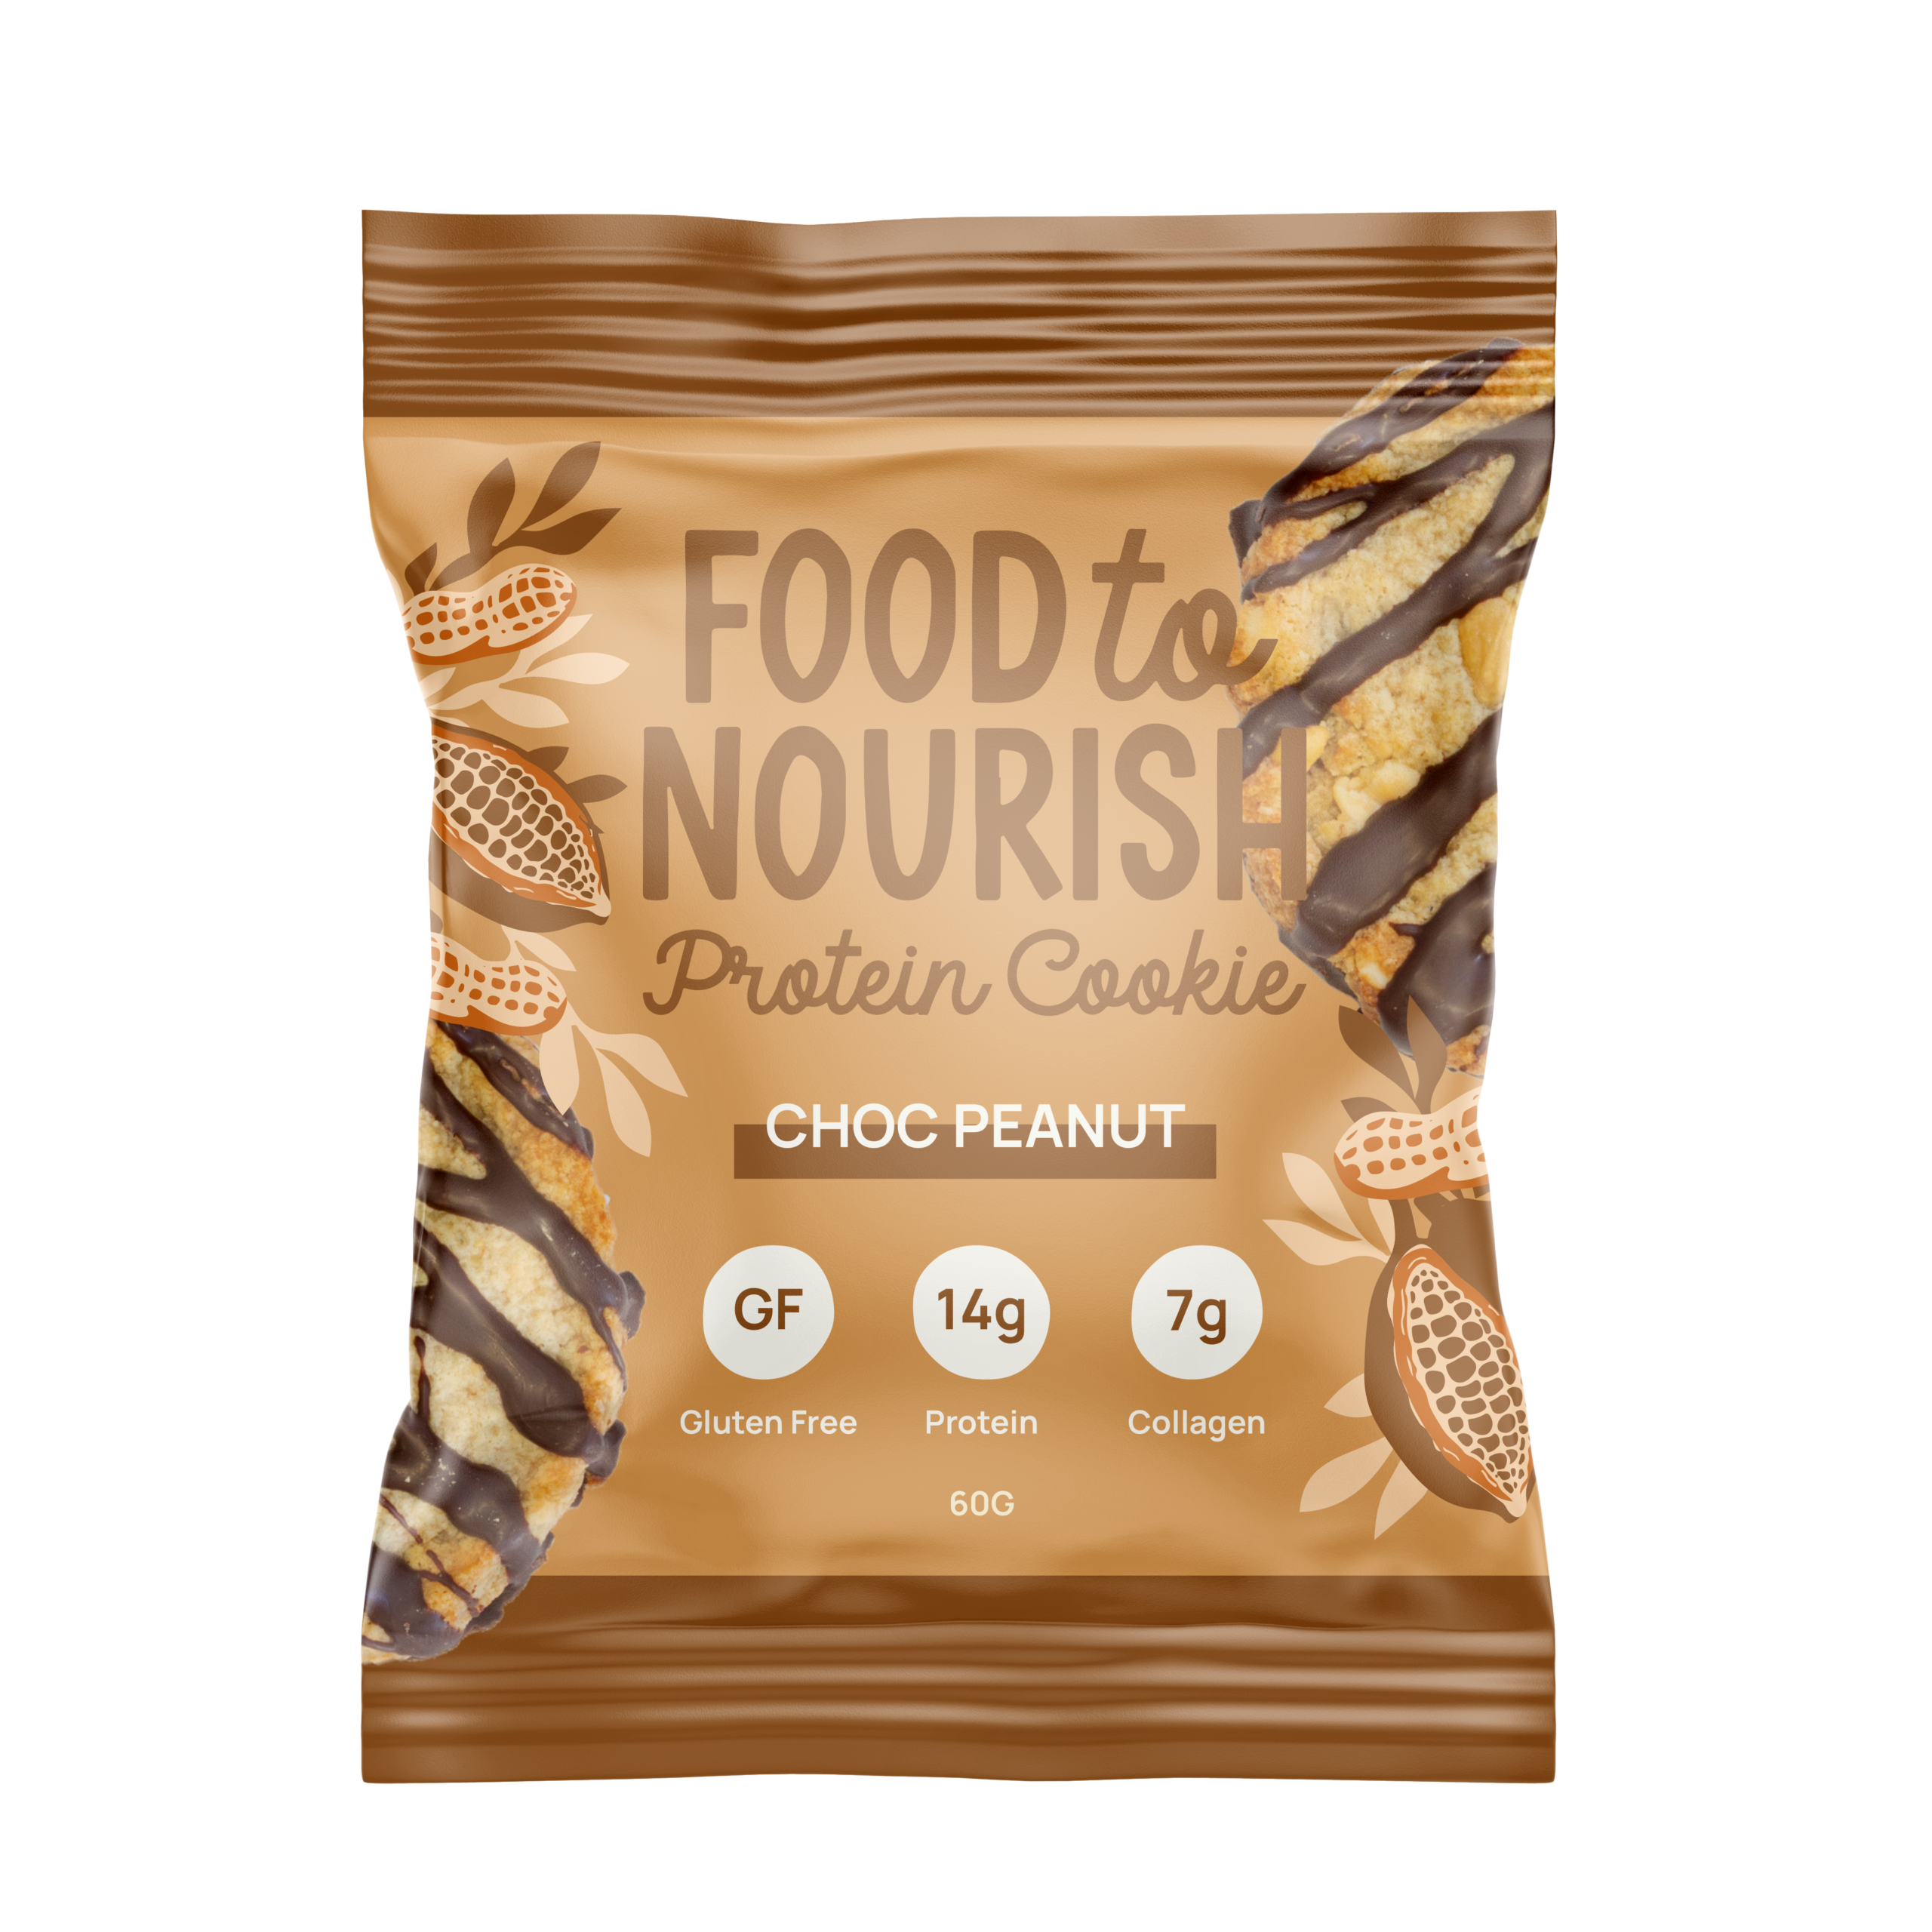 FTN_ProteinCookie_ChocPeanut_front